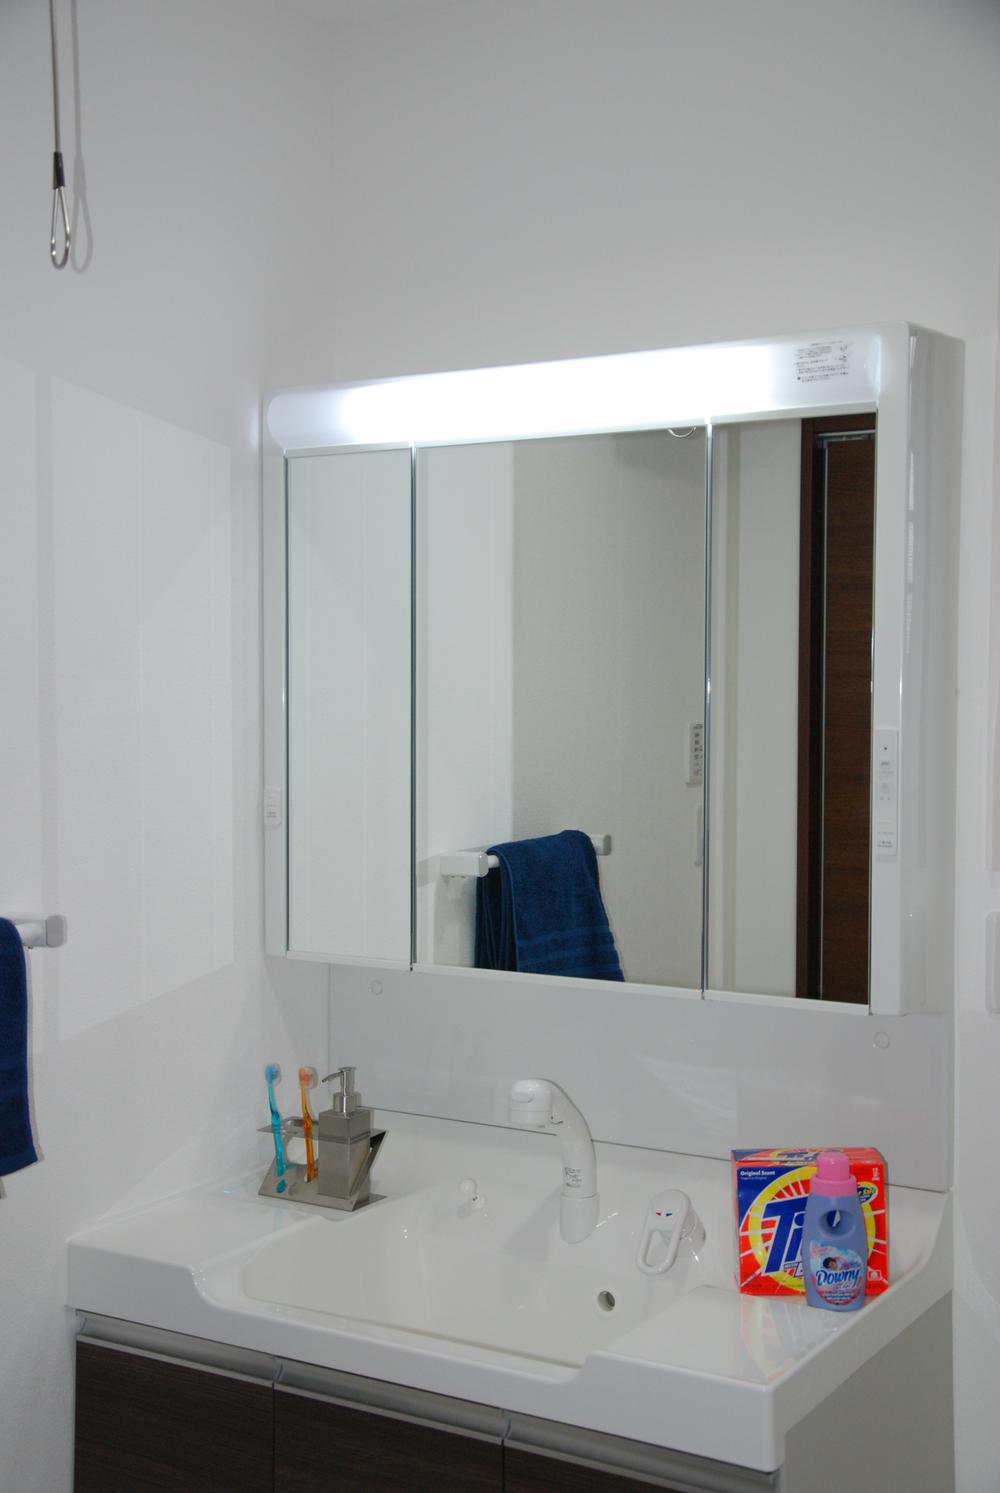 Building plan example (introspection photo). In 3-surface mirror in the bathroom, Storage is plenty.